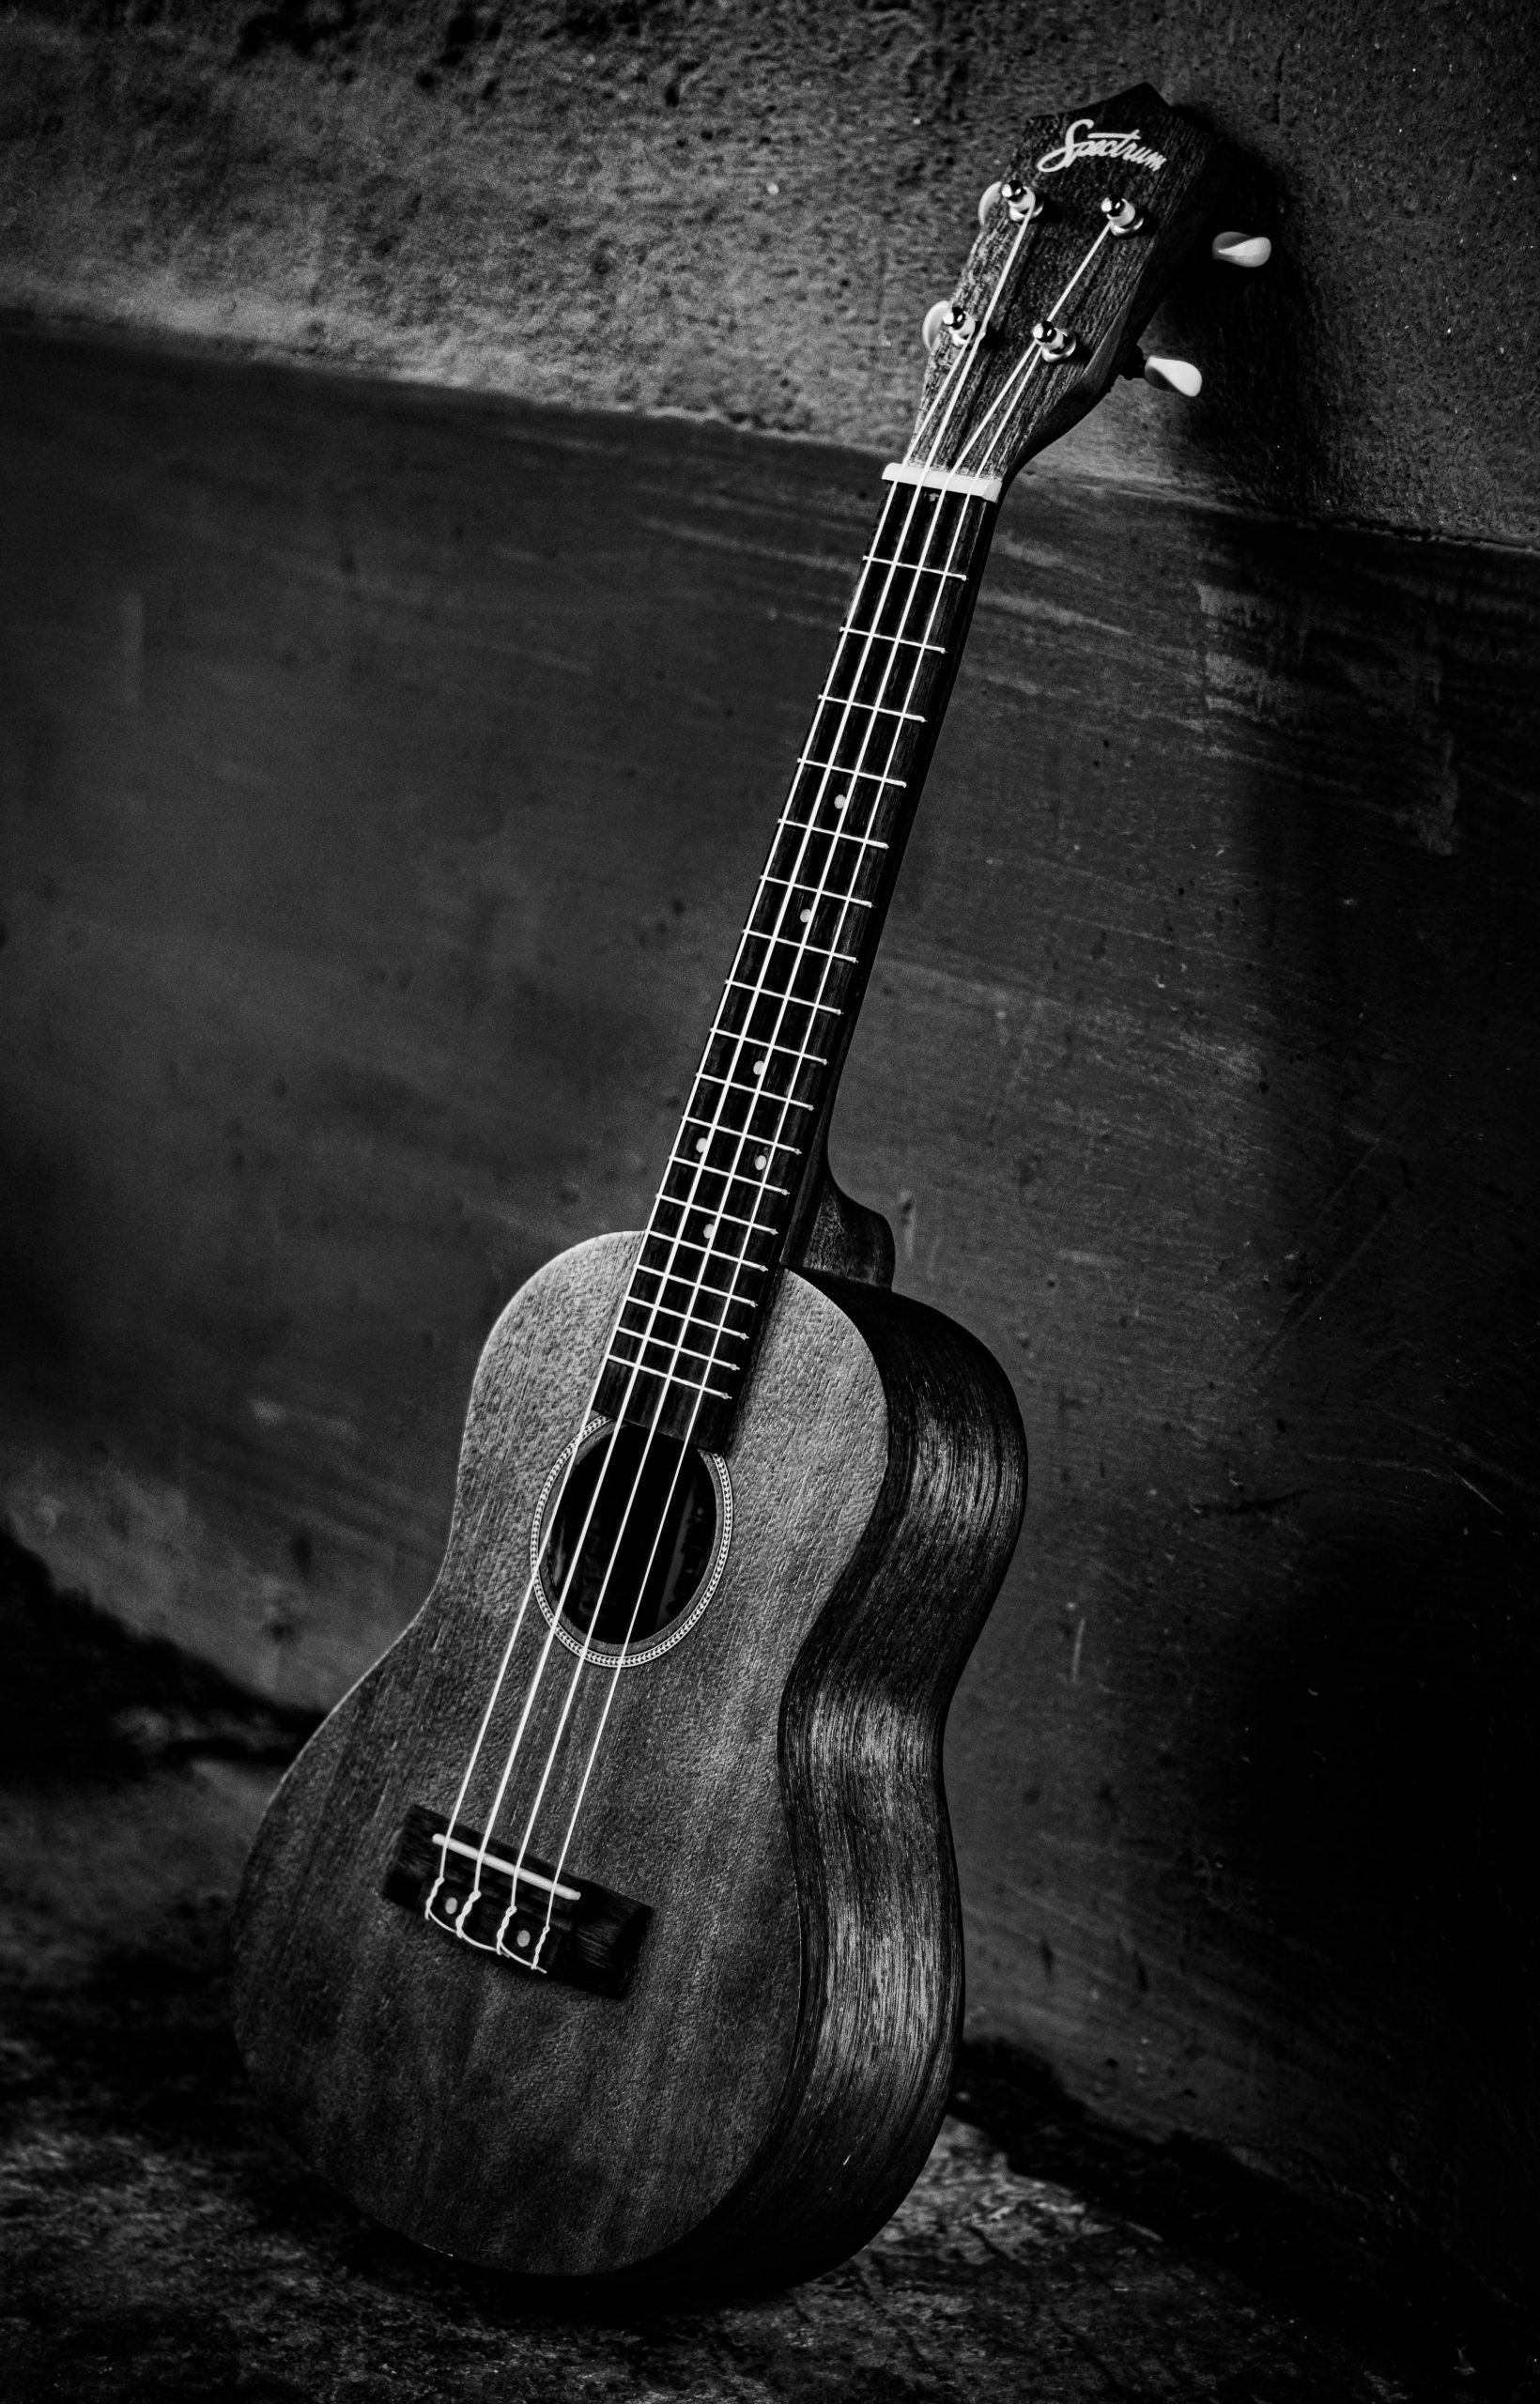 Musical Instrument on Black and White